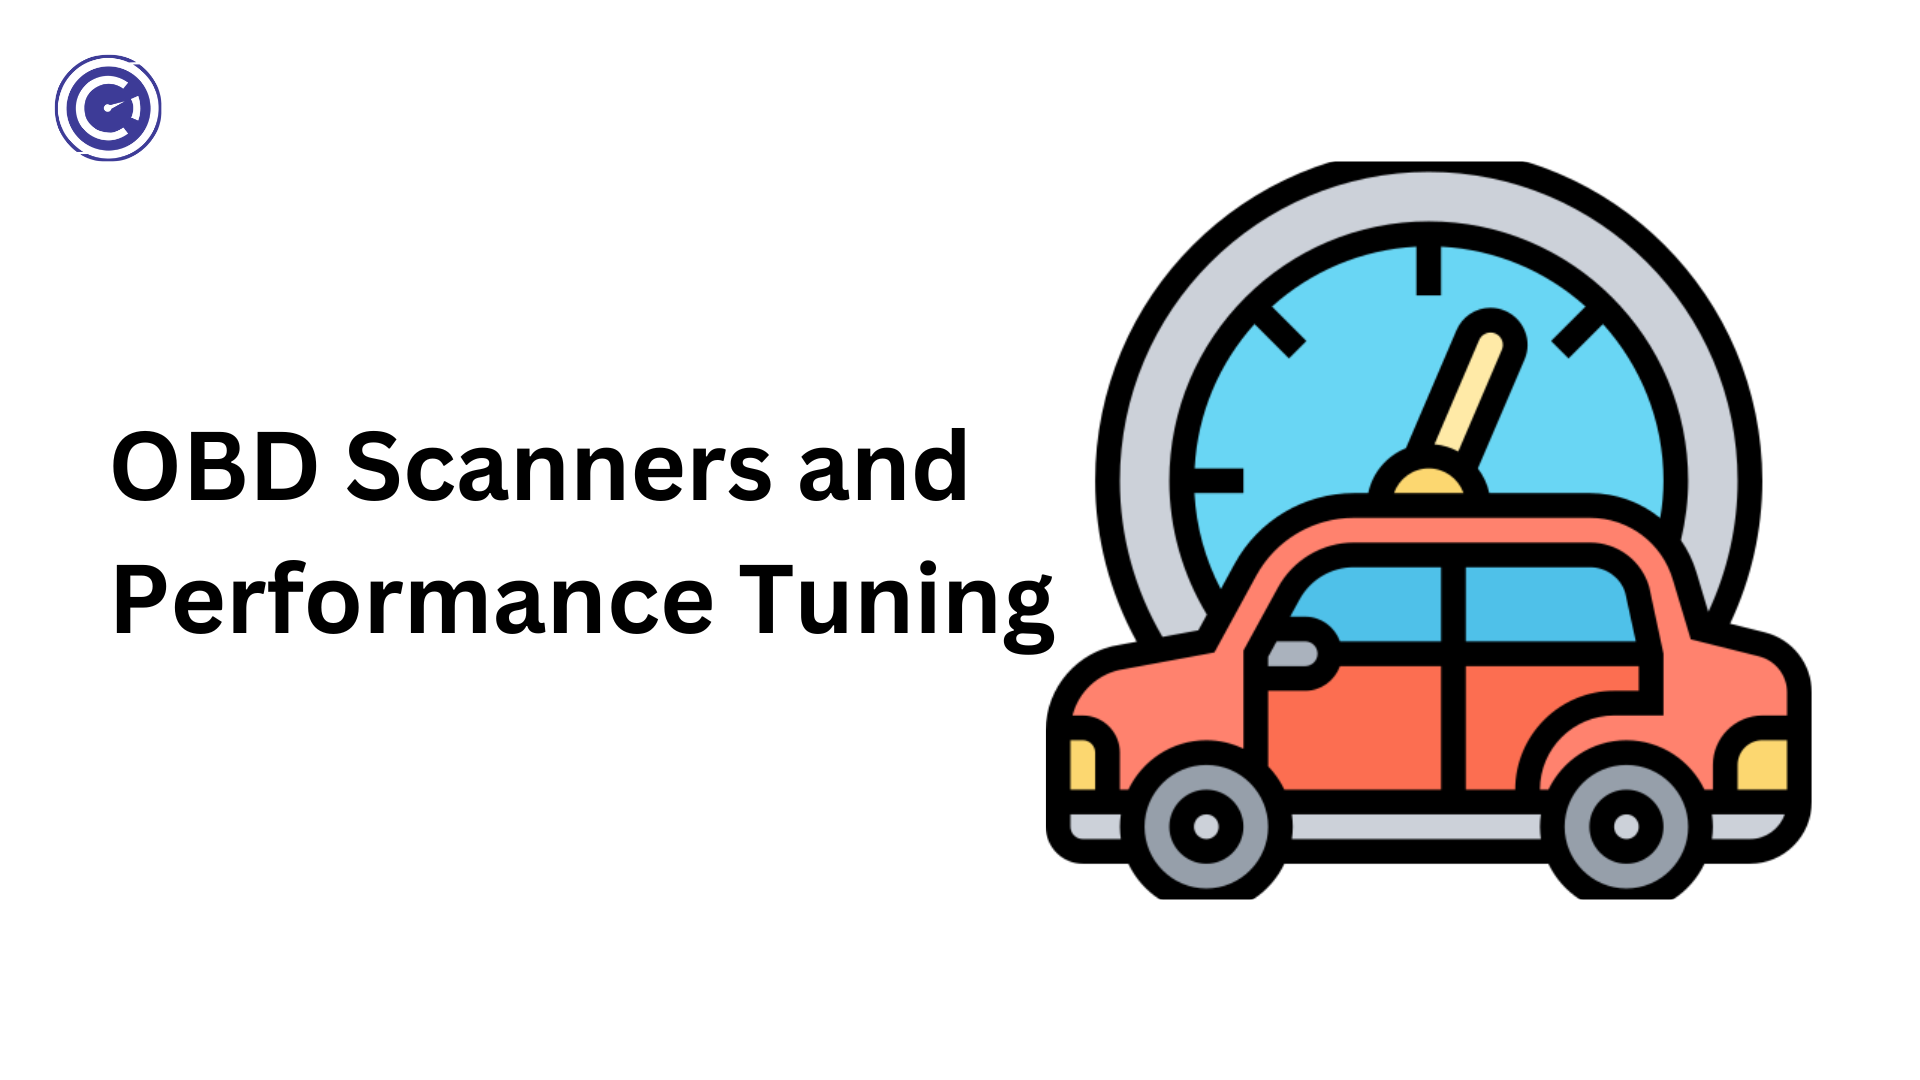 OBD Scanners and Performance Tuning